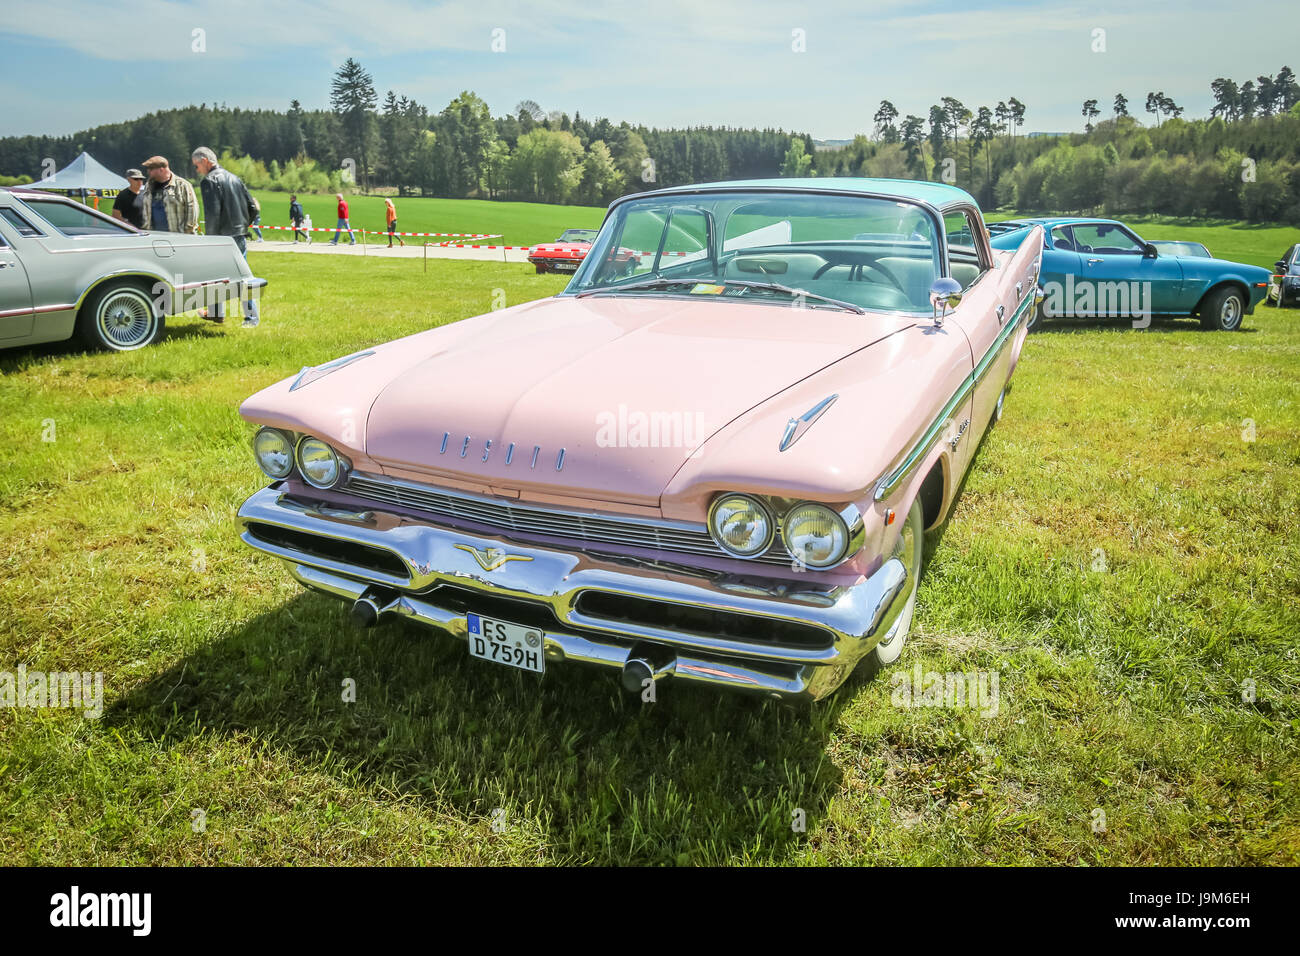 NANDLSTADT, GERMANY - MAY 6, 2017 : People sightseeing american automobile DeSoto Chrysler displayed at the US Car meeting in Nandlstadt, Germany. Stock Photo